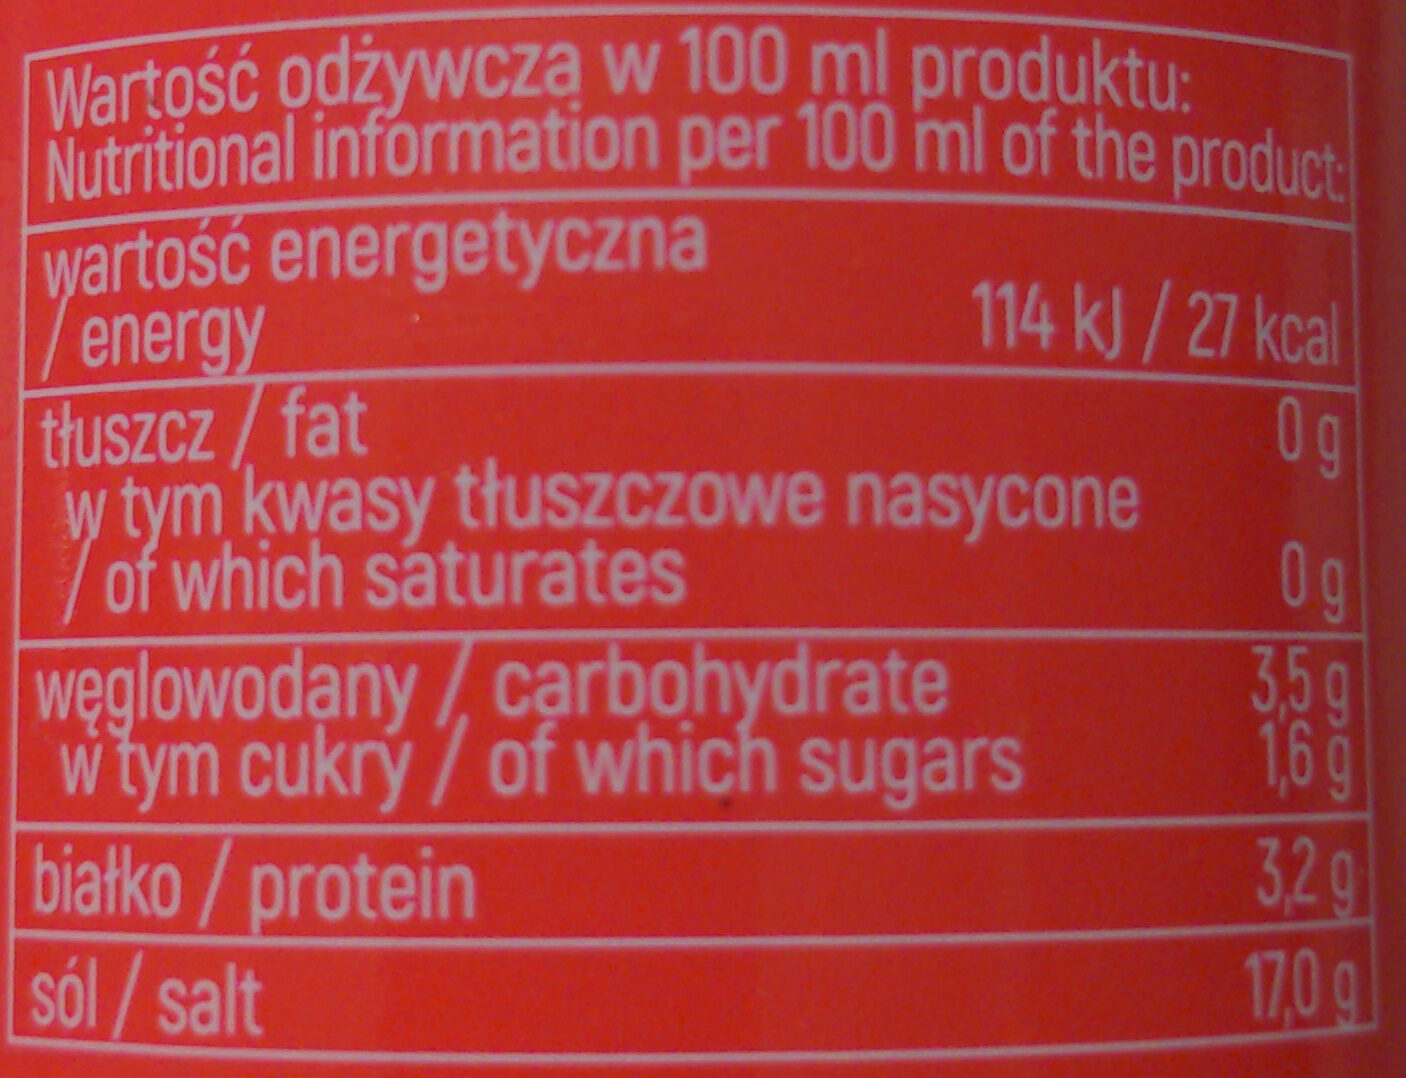 Sos sojowy jasny - Nutrition facts - pl